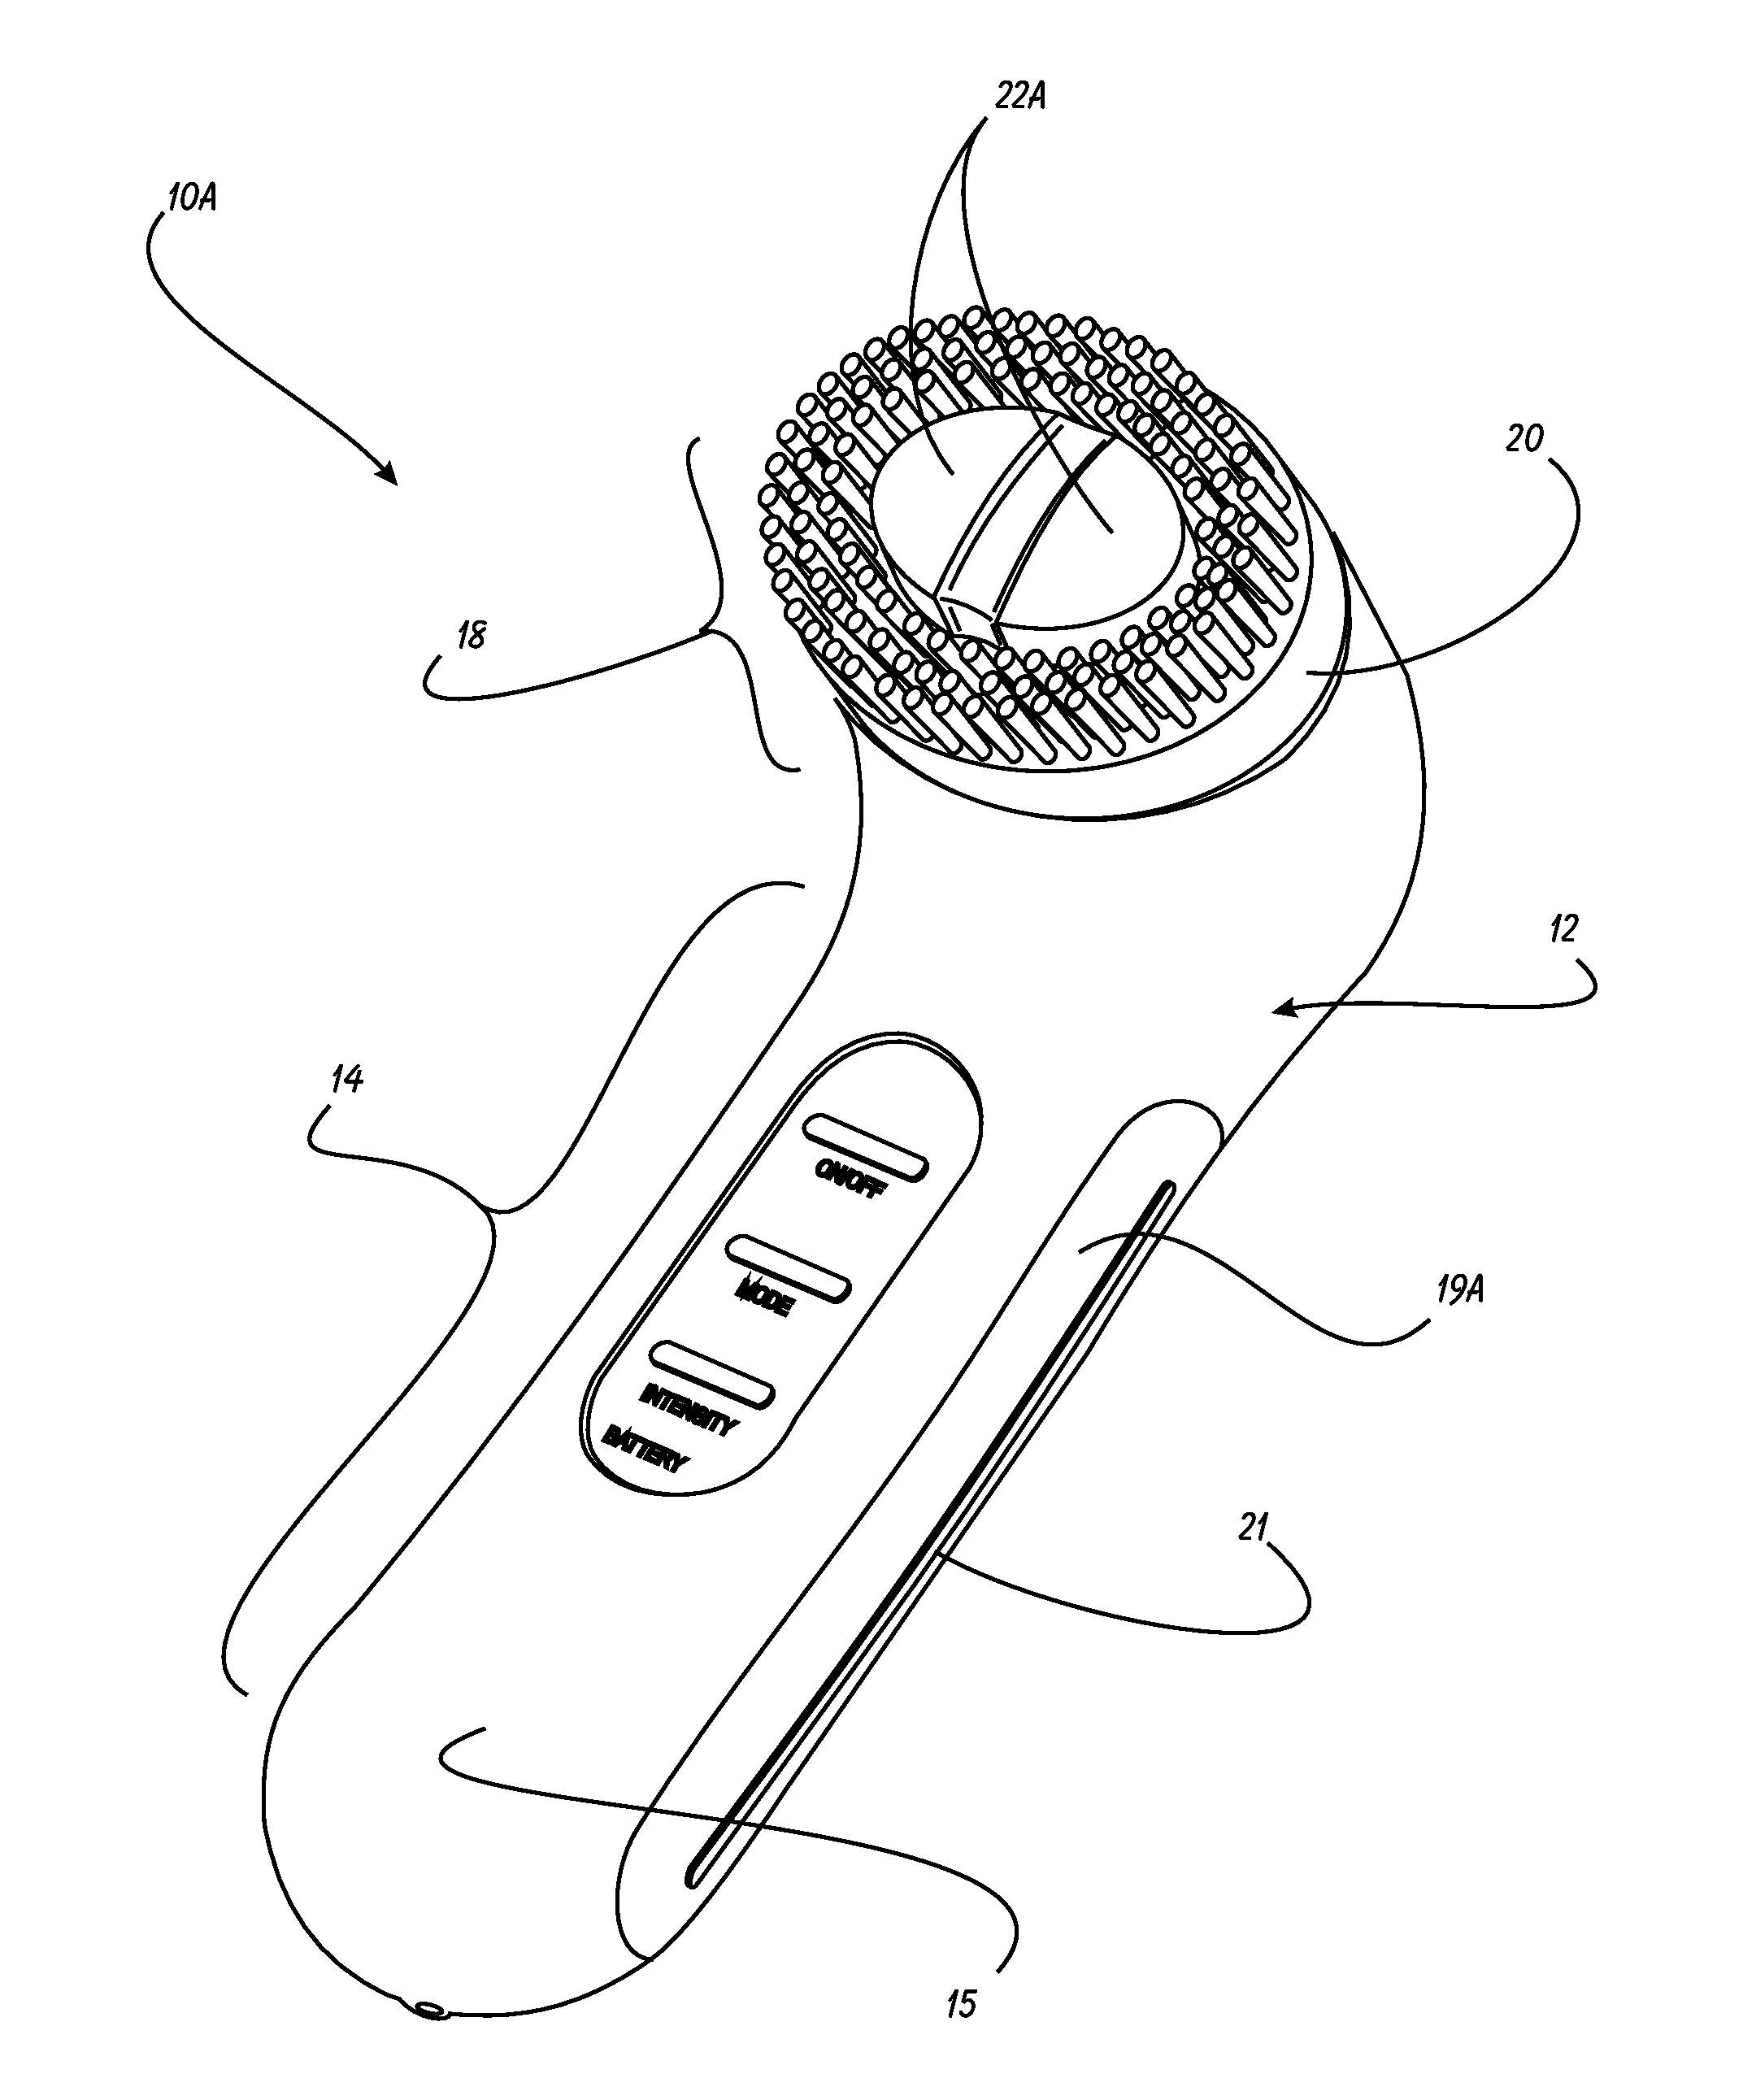 Handheld facial massage and microcurrent therapy device